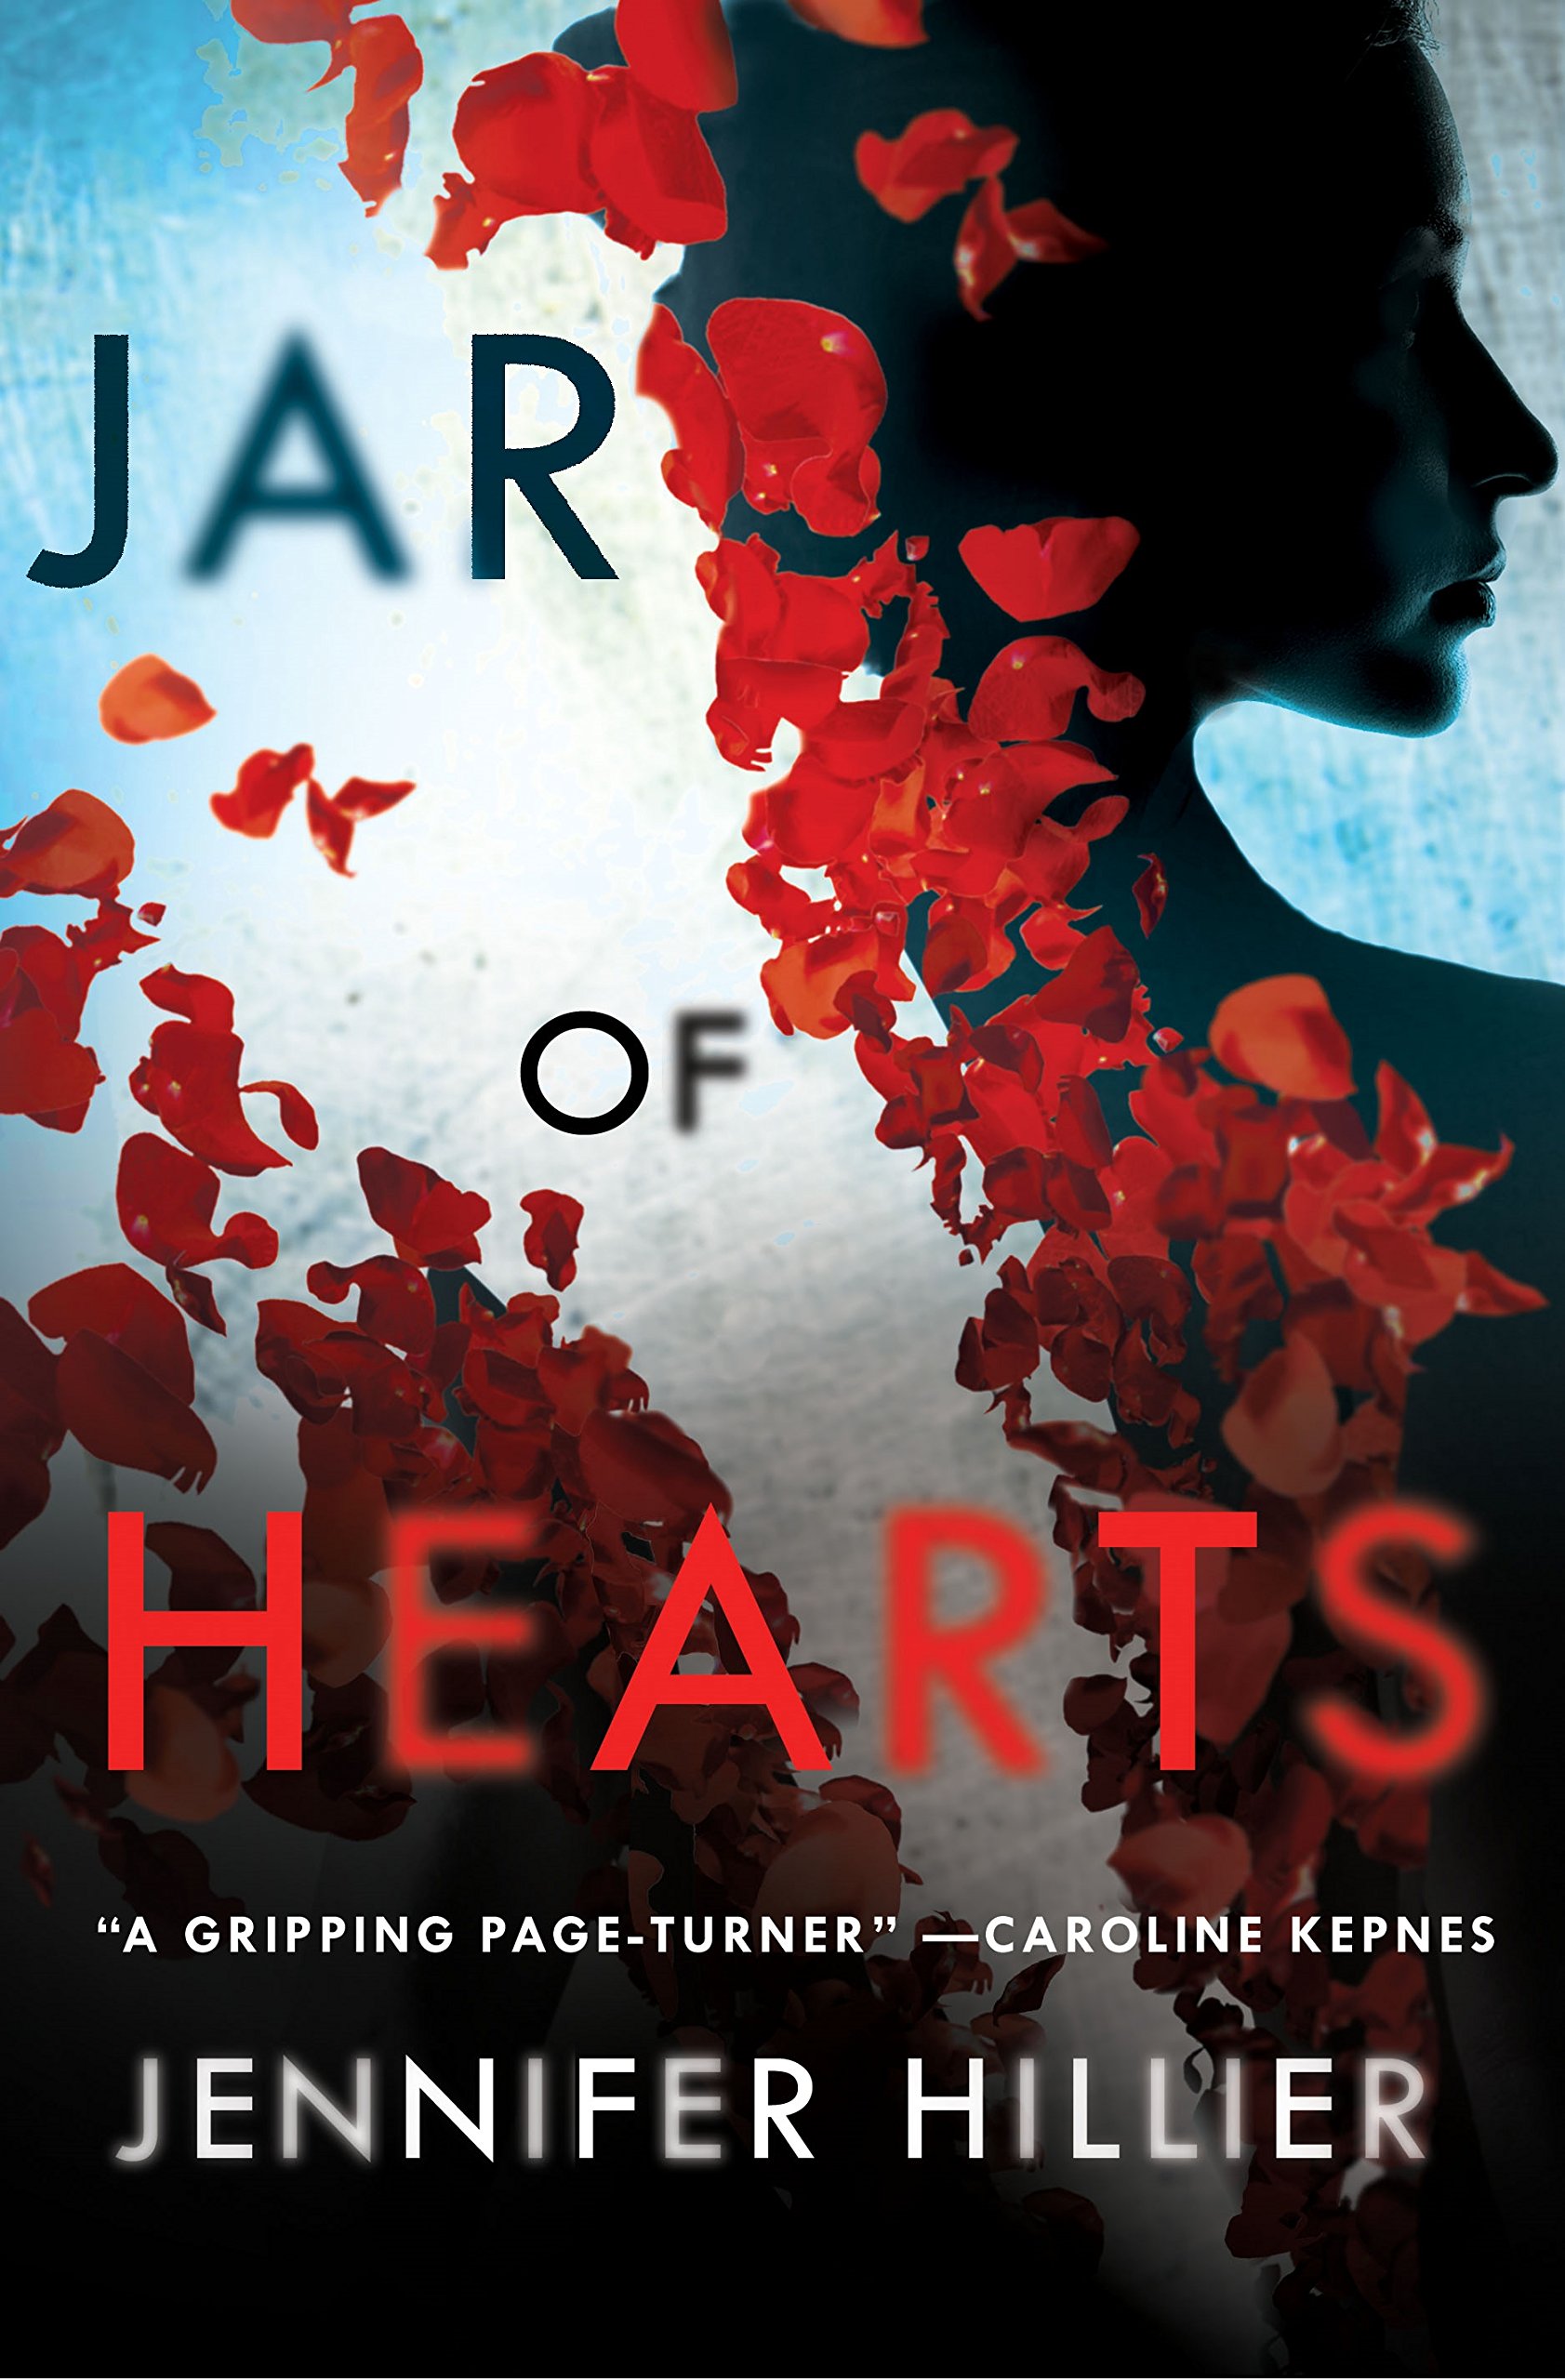 Jar of Hearts by Jennifer Hillier book review